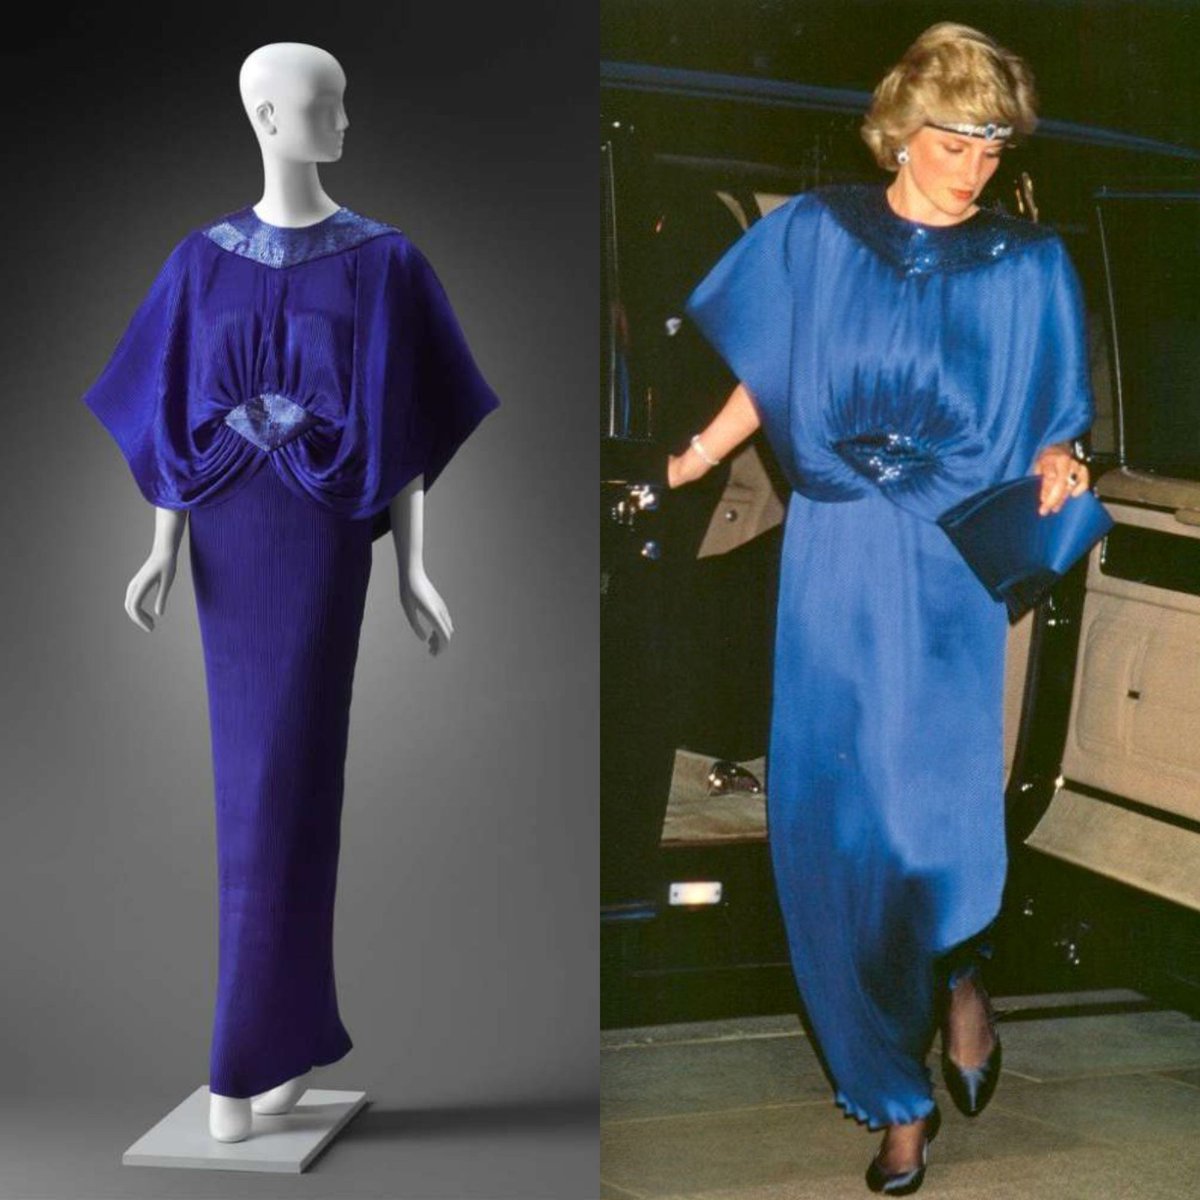 Princess Diana attended a state dinner at the Imperial Palace in Tokyo #OnThisDay in 1986. She wore a royal blue finely pleated silk evening dress with batwing sleeves, embellished with blue glass beads, by Japanese designer Yuki. @mfaboston collection. #PrincessDiana #dress